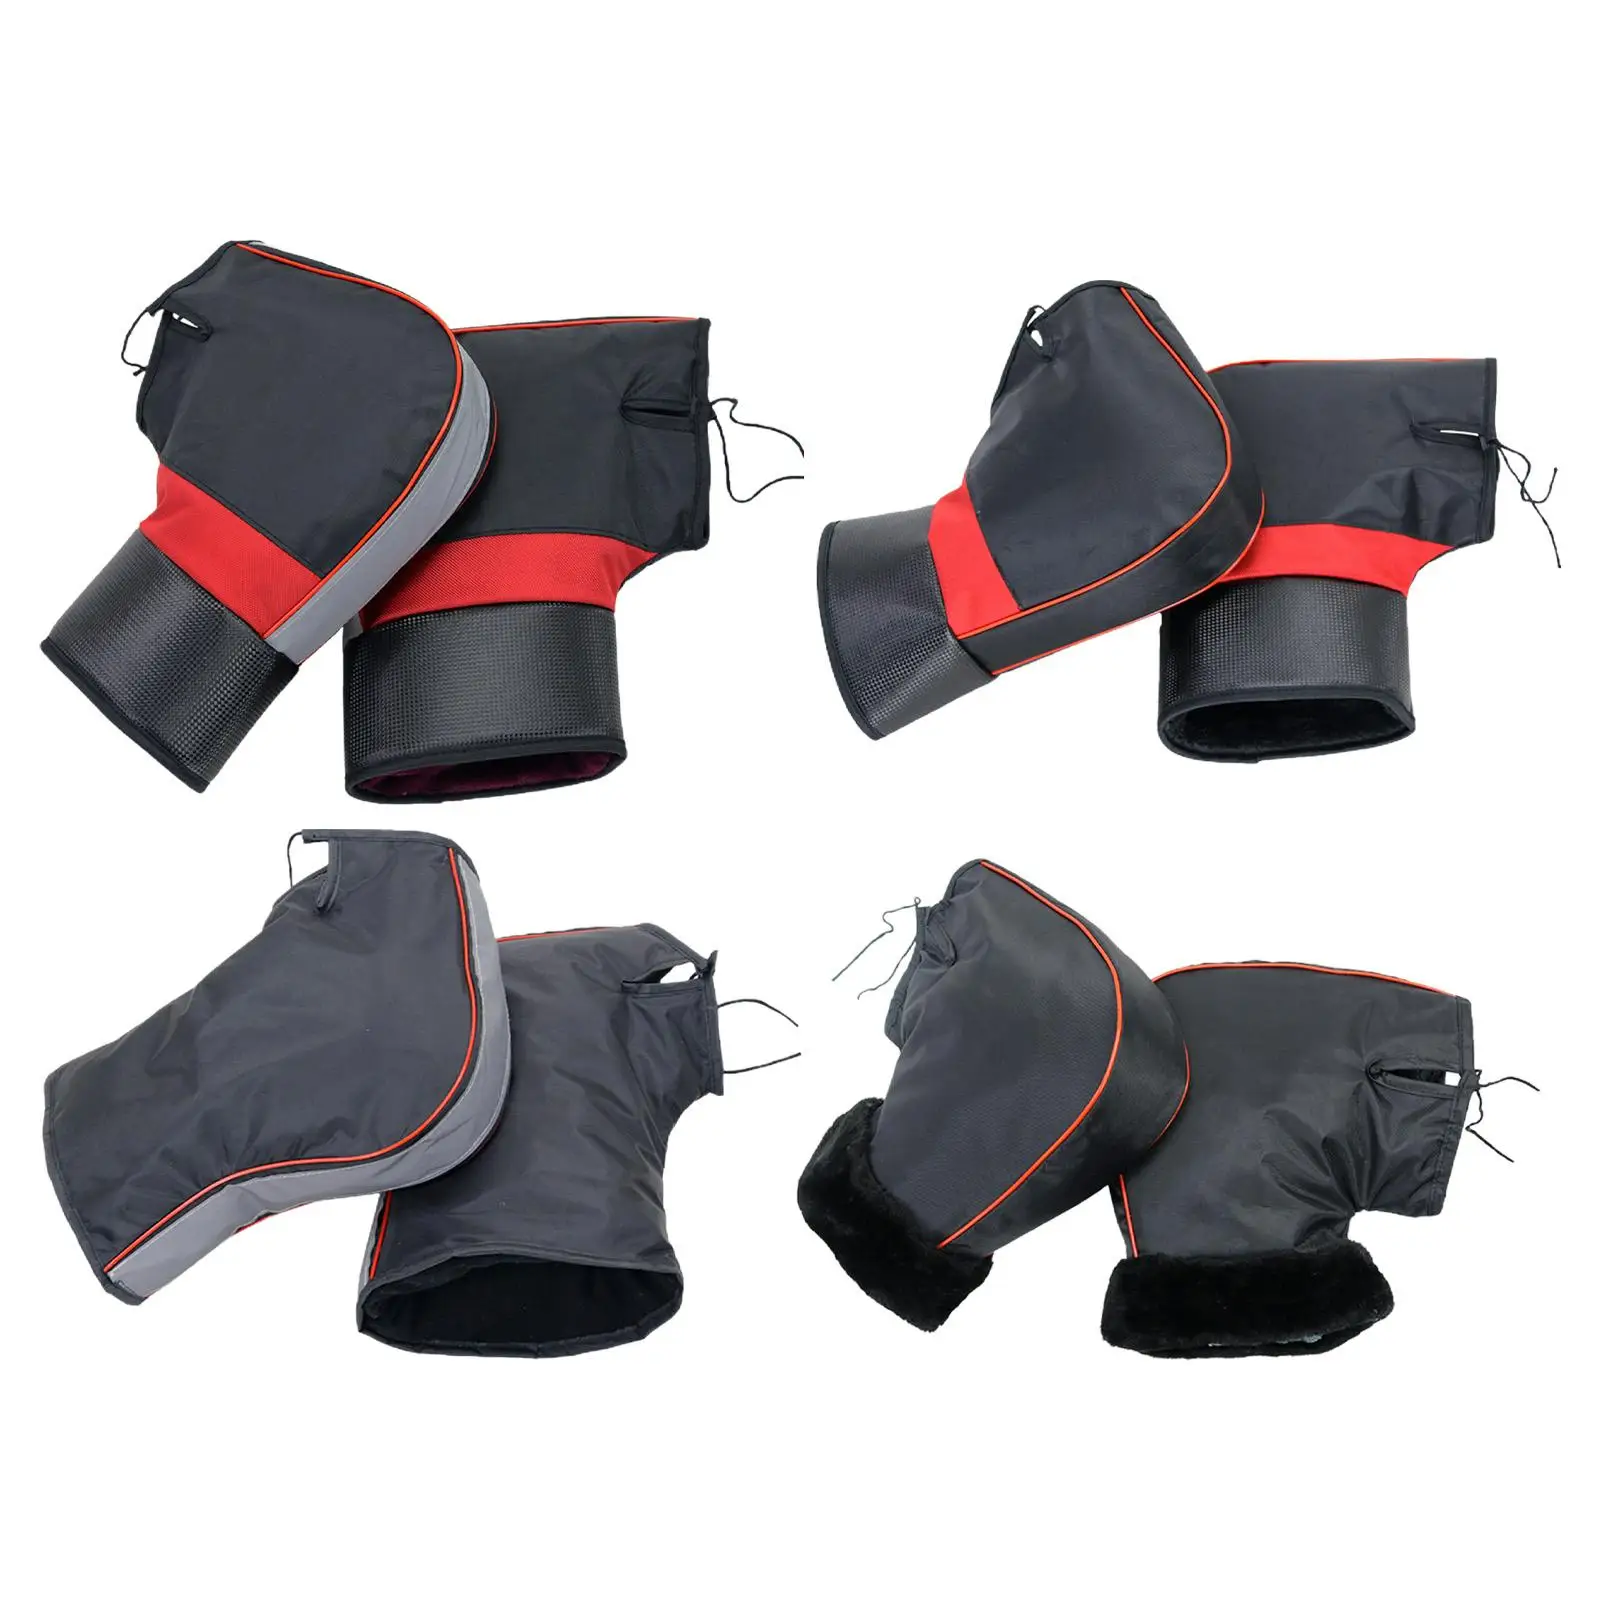 Cold Weather Motorcycle Riding Handlebar Muffs, Weather Protection Gloves, PU Leather Warm Protective Windproof Handlebar Mitts